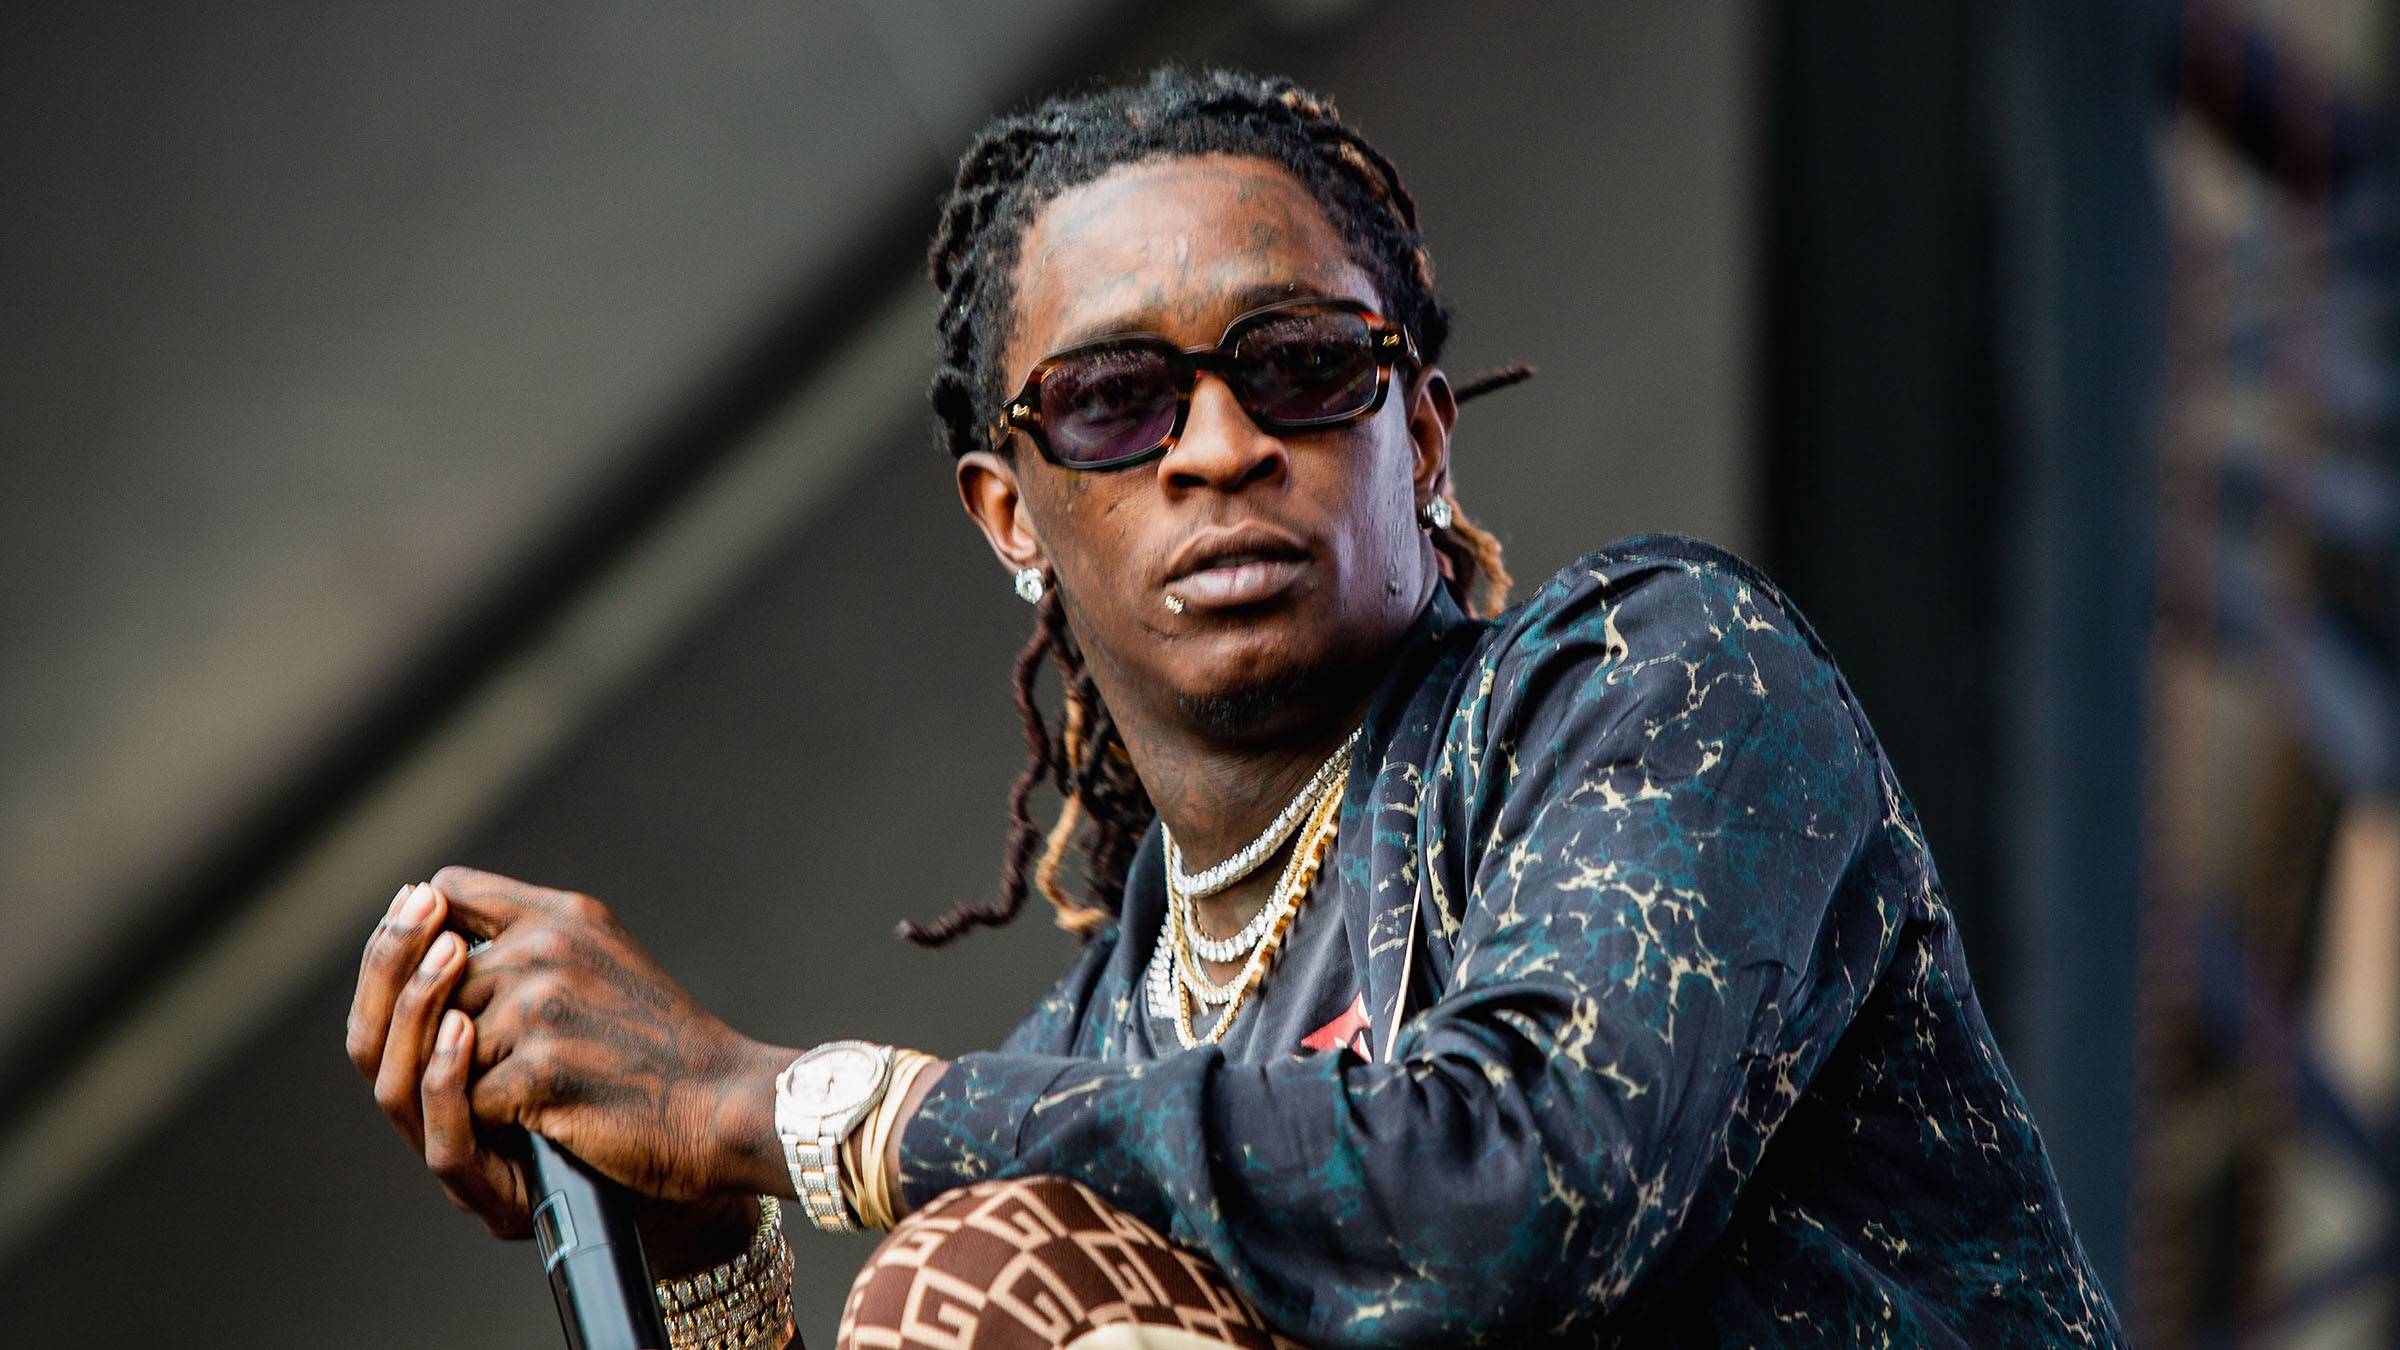 Young Thug's Lyrics To Be Used As Evidence In Court | News | BET